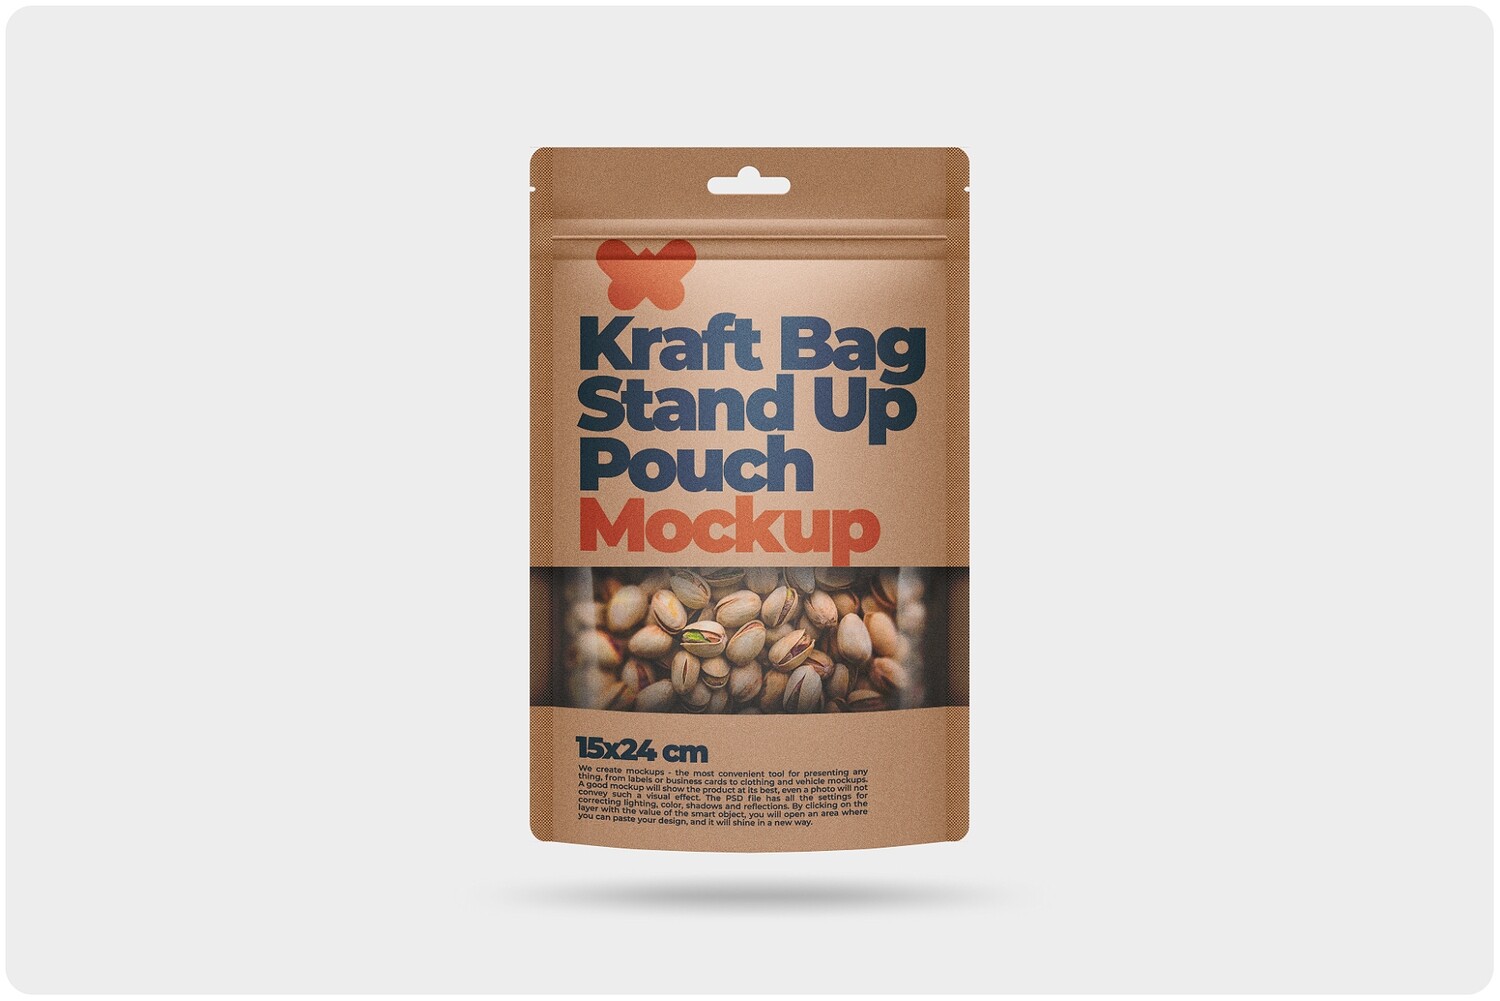 Kraft Bag Stand Up Pouch Doypack with Clear Window Mockup 6x9,5in (15x24cm)